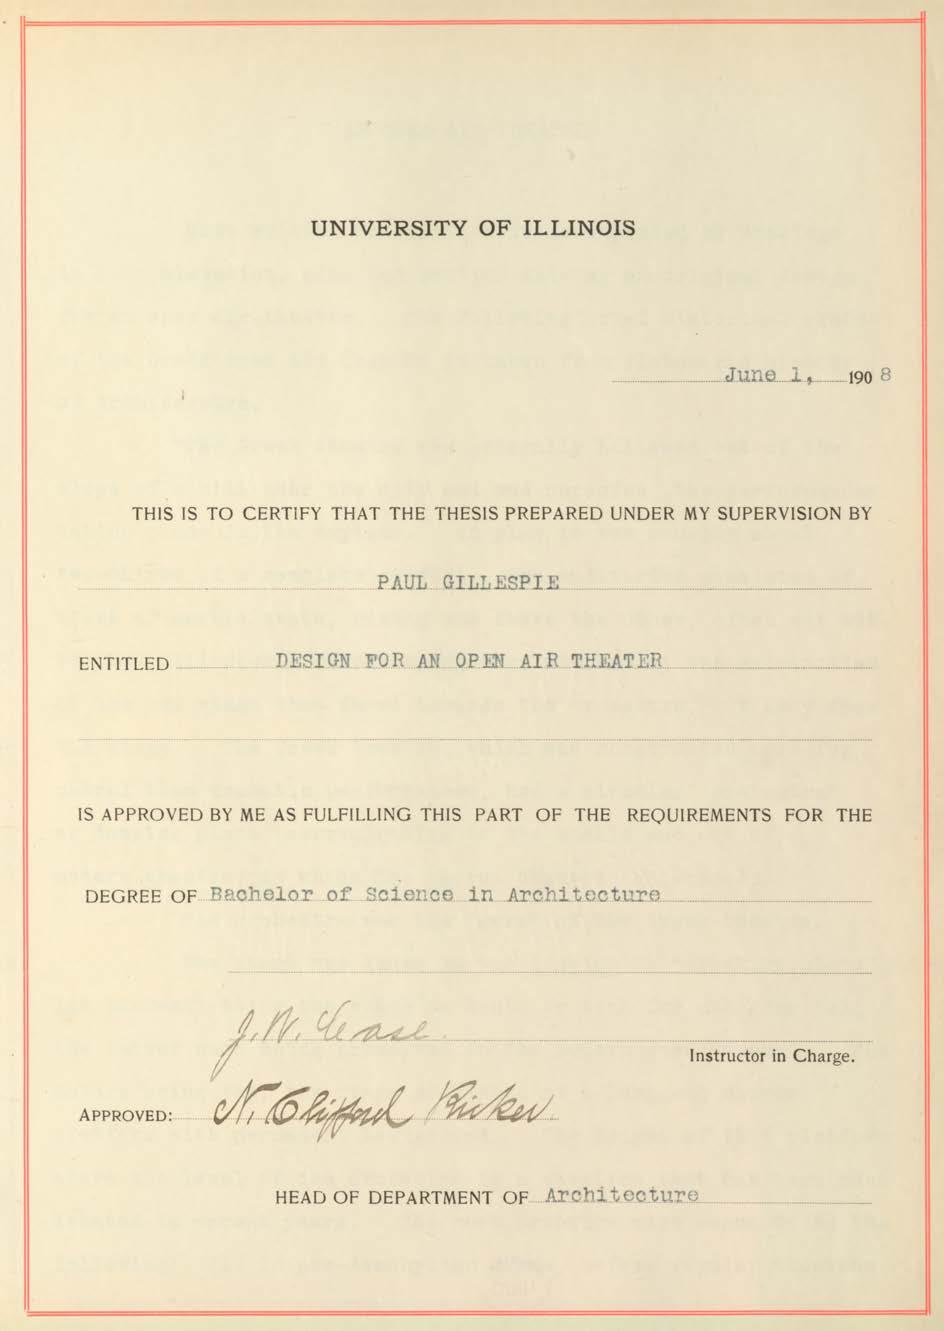 UNIVERSITY OF ILLINOIS June.1,.. 190 8 THIS IS TO CERTIFY THAT THE THESIS PREPARED UNDER MY SUPERVISION BY........ PAUL.GILLESPIE. ENTITLED DESIGN FOR AN OPEN AIR THEATER.